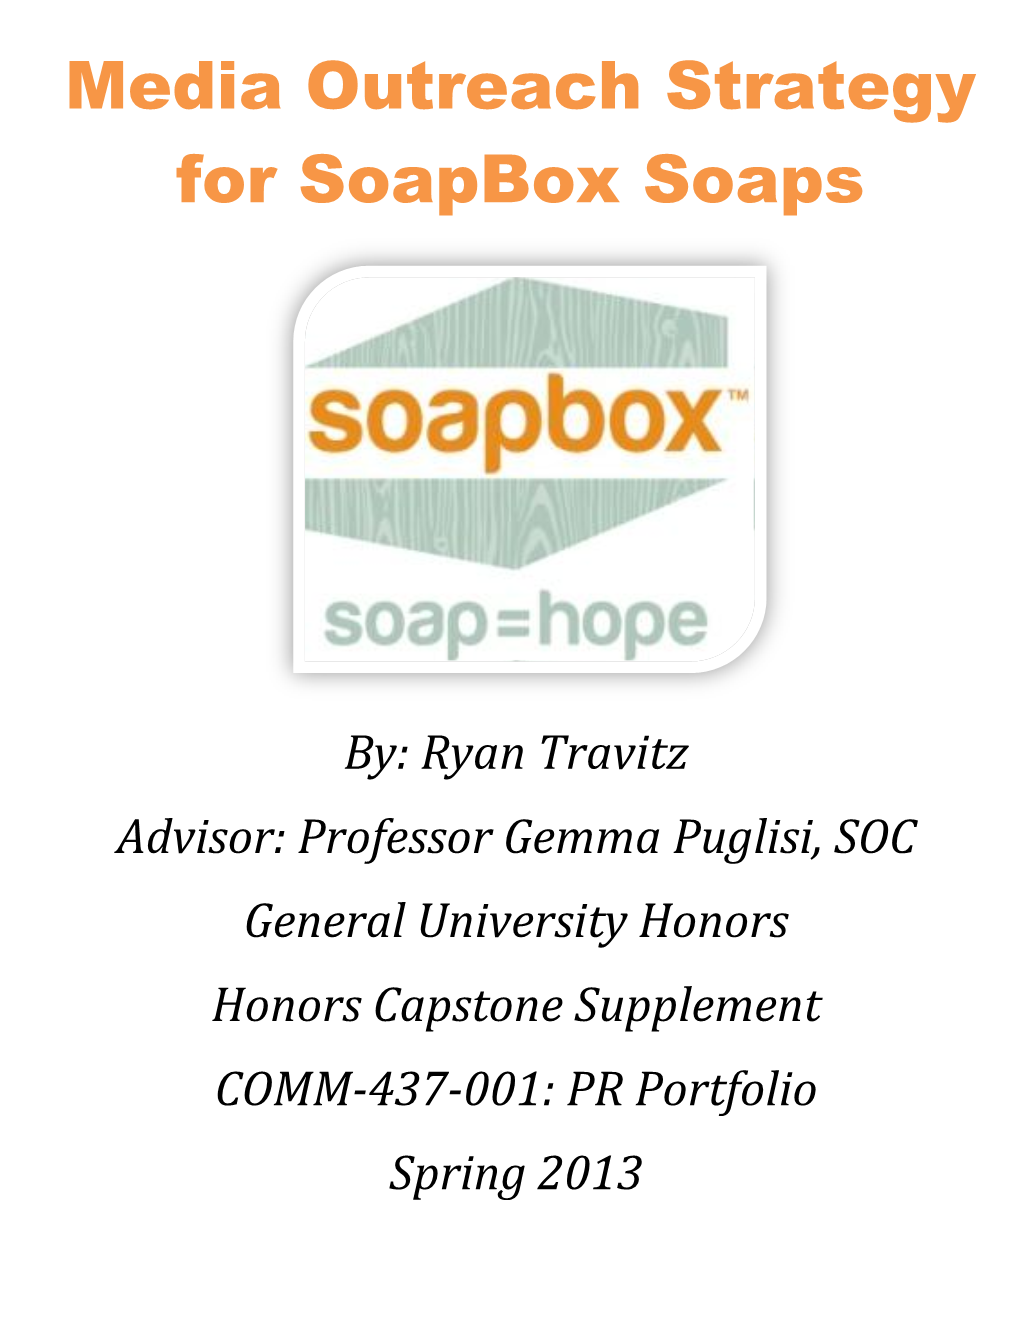 Media Outreach Strategy for Soapbox Soaps